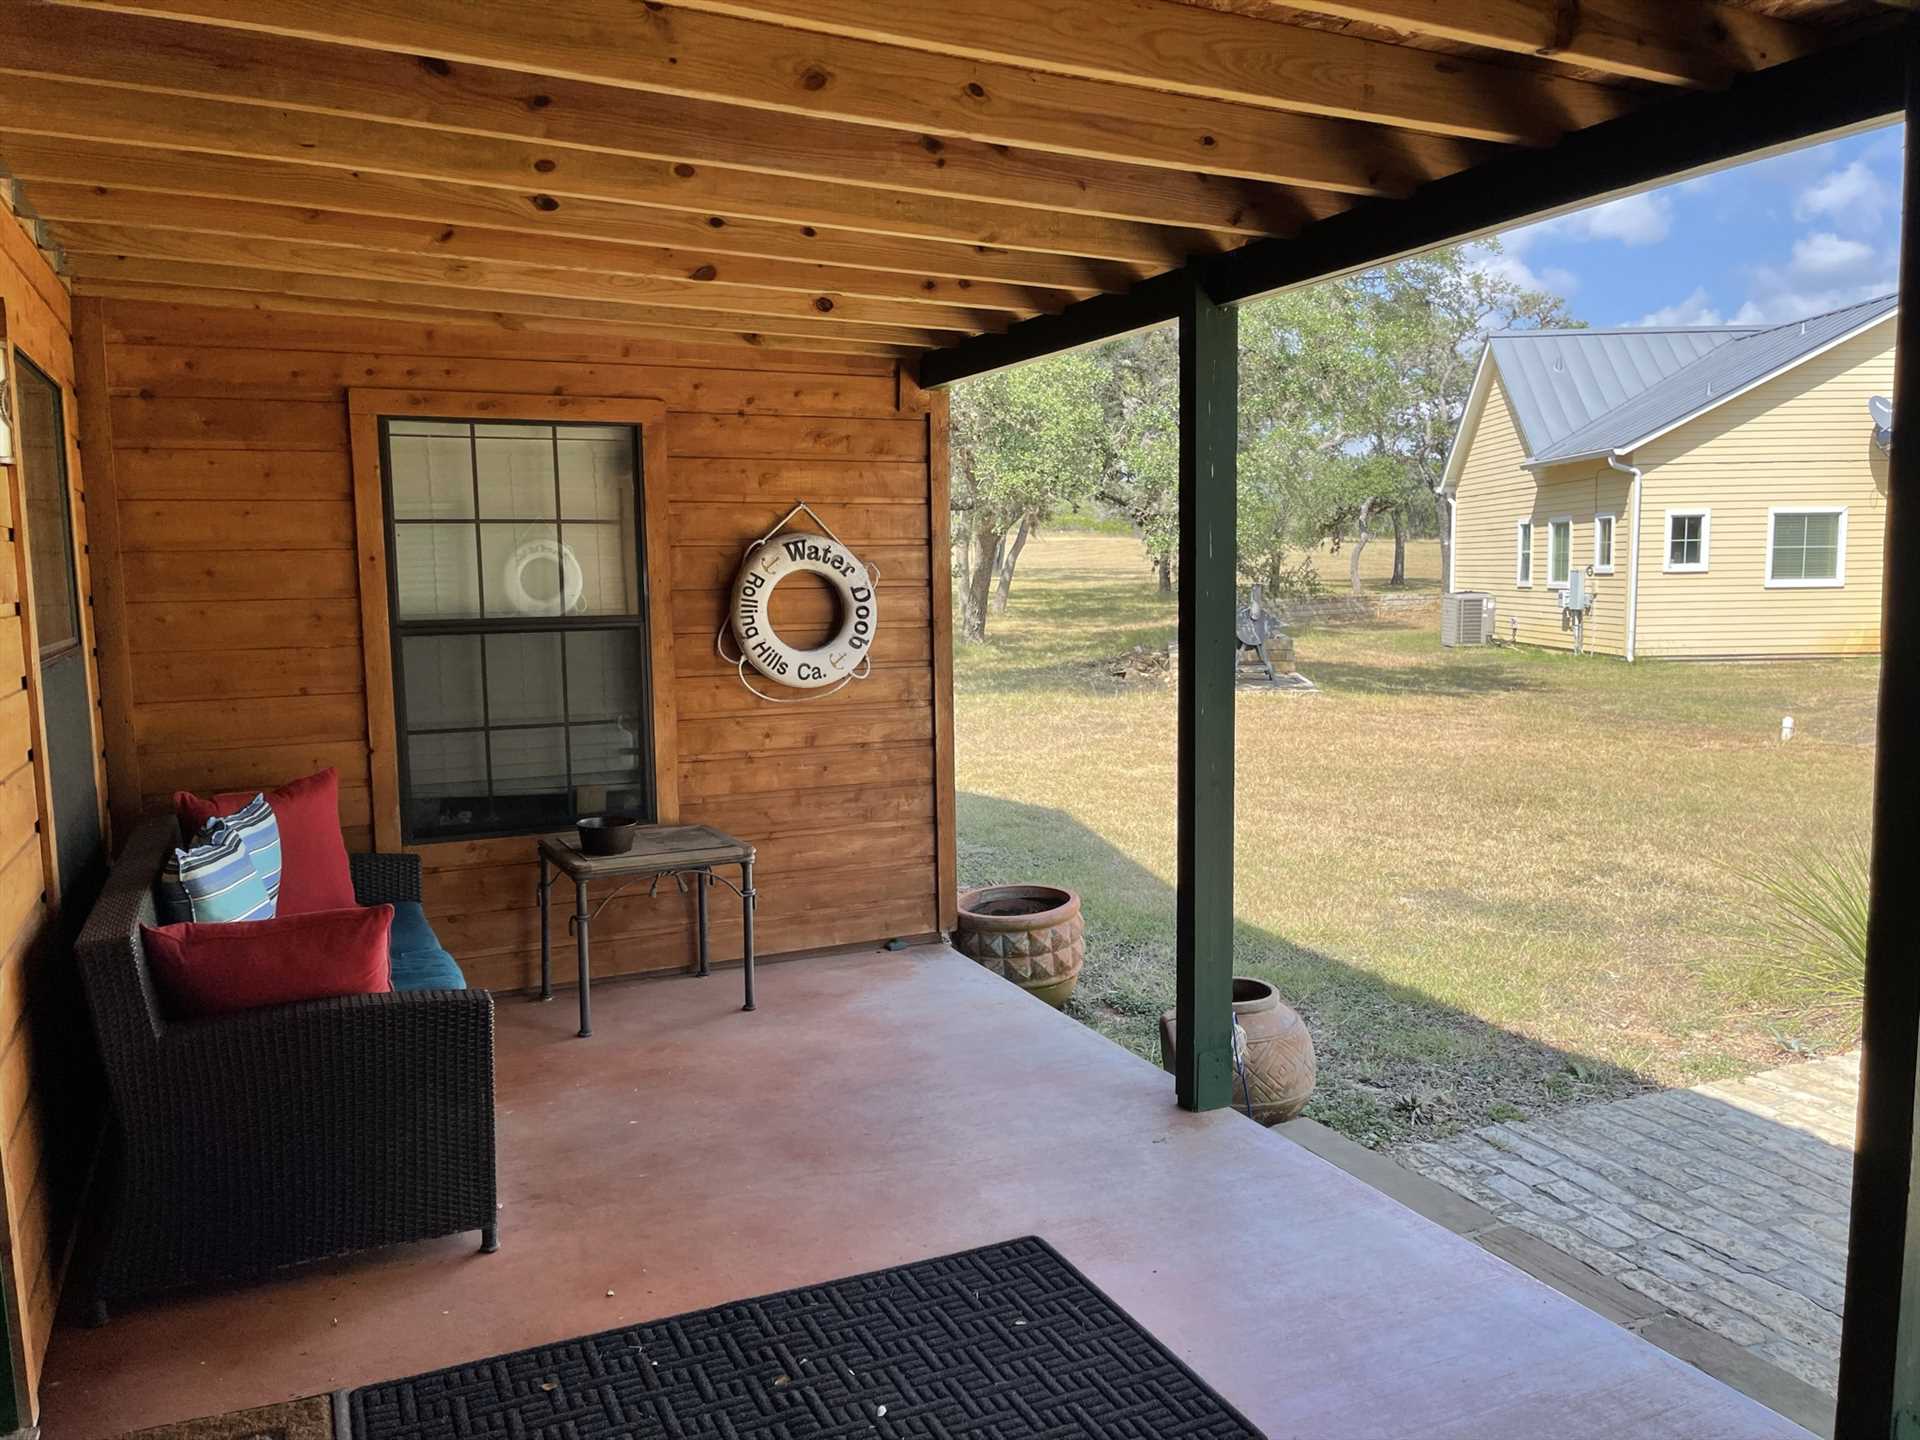                                                 We've created a comfy living space for you outside, with plush furniture on the shaded porch!